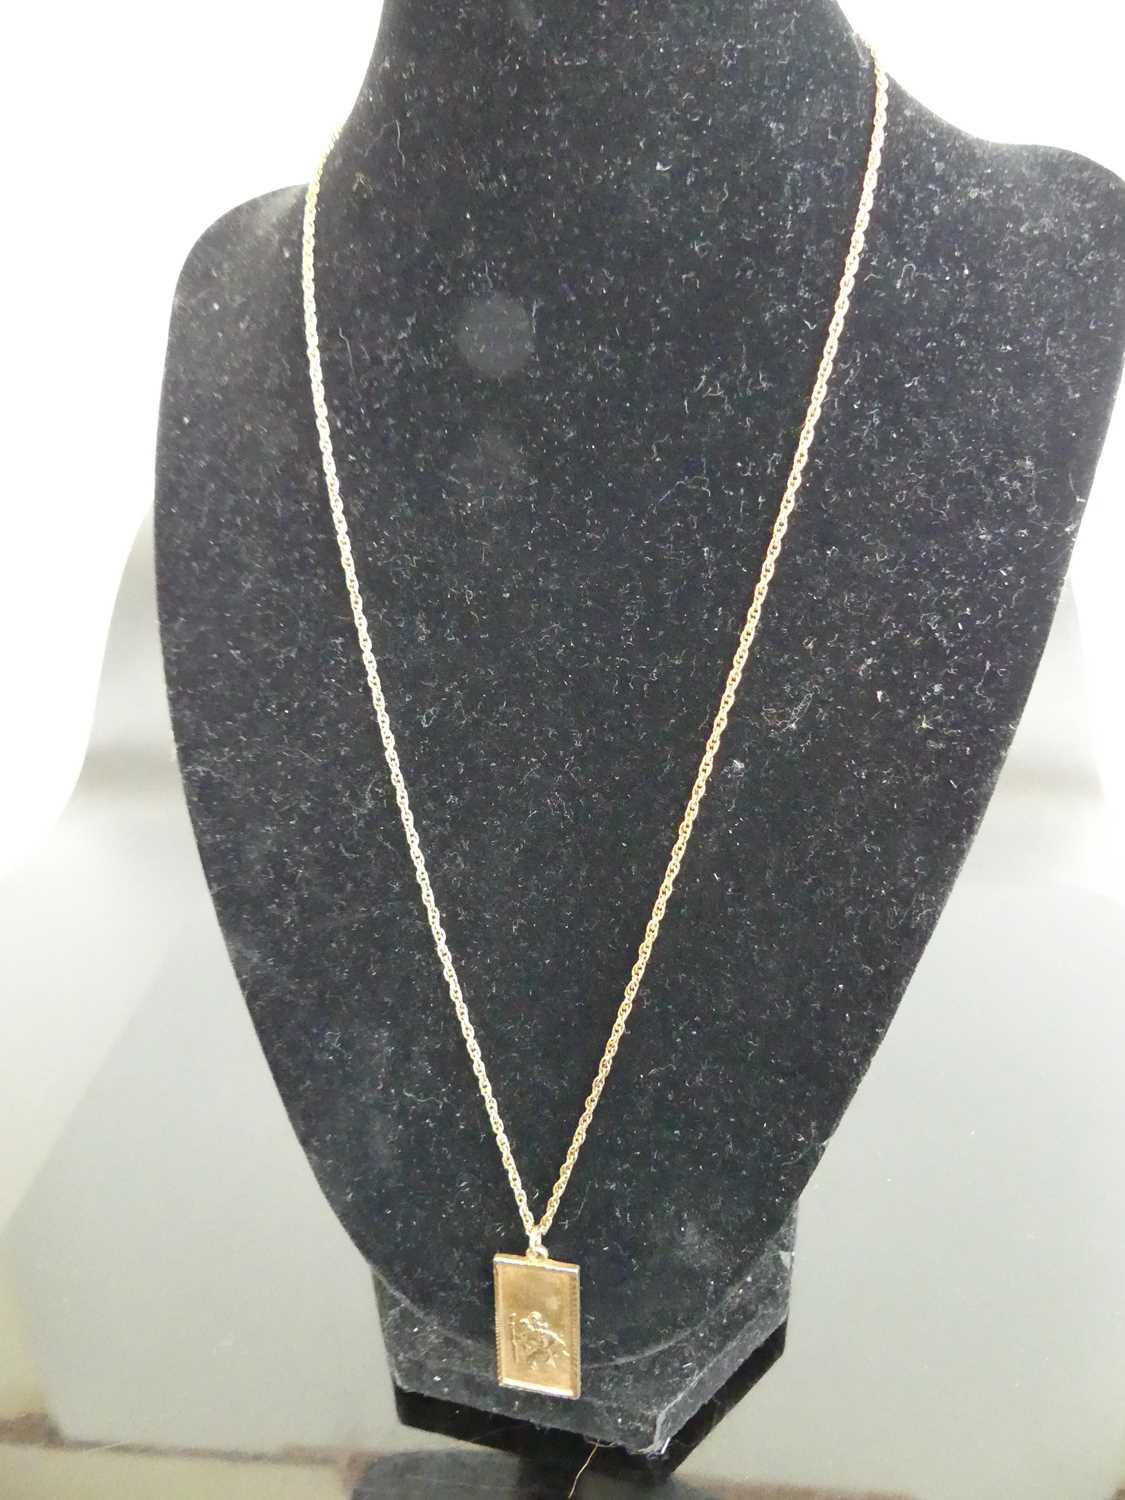 A modern 9ct gold pendant on finelink neck chain, 8.3g - Image 2 of 2